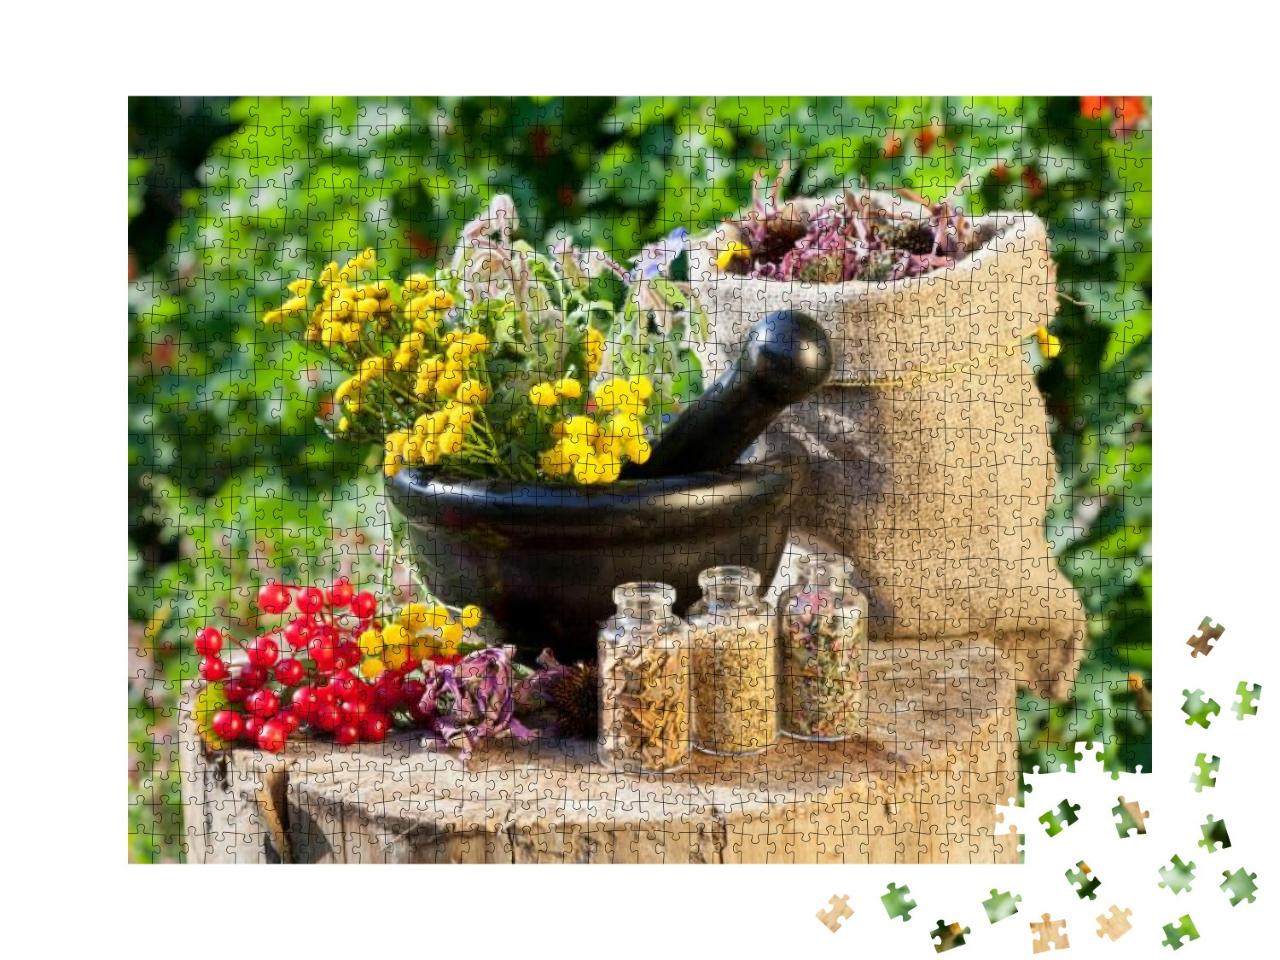 Healing Herbs in Mortar & in Sack, Herbal Medicine... Jigsaw Puzzle with 1000 pieces